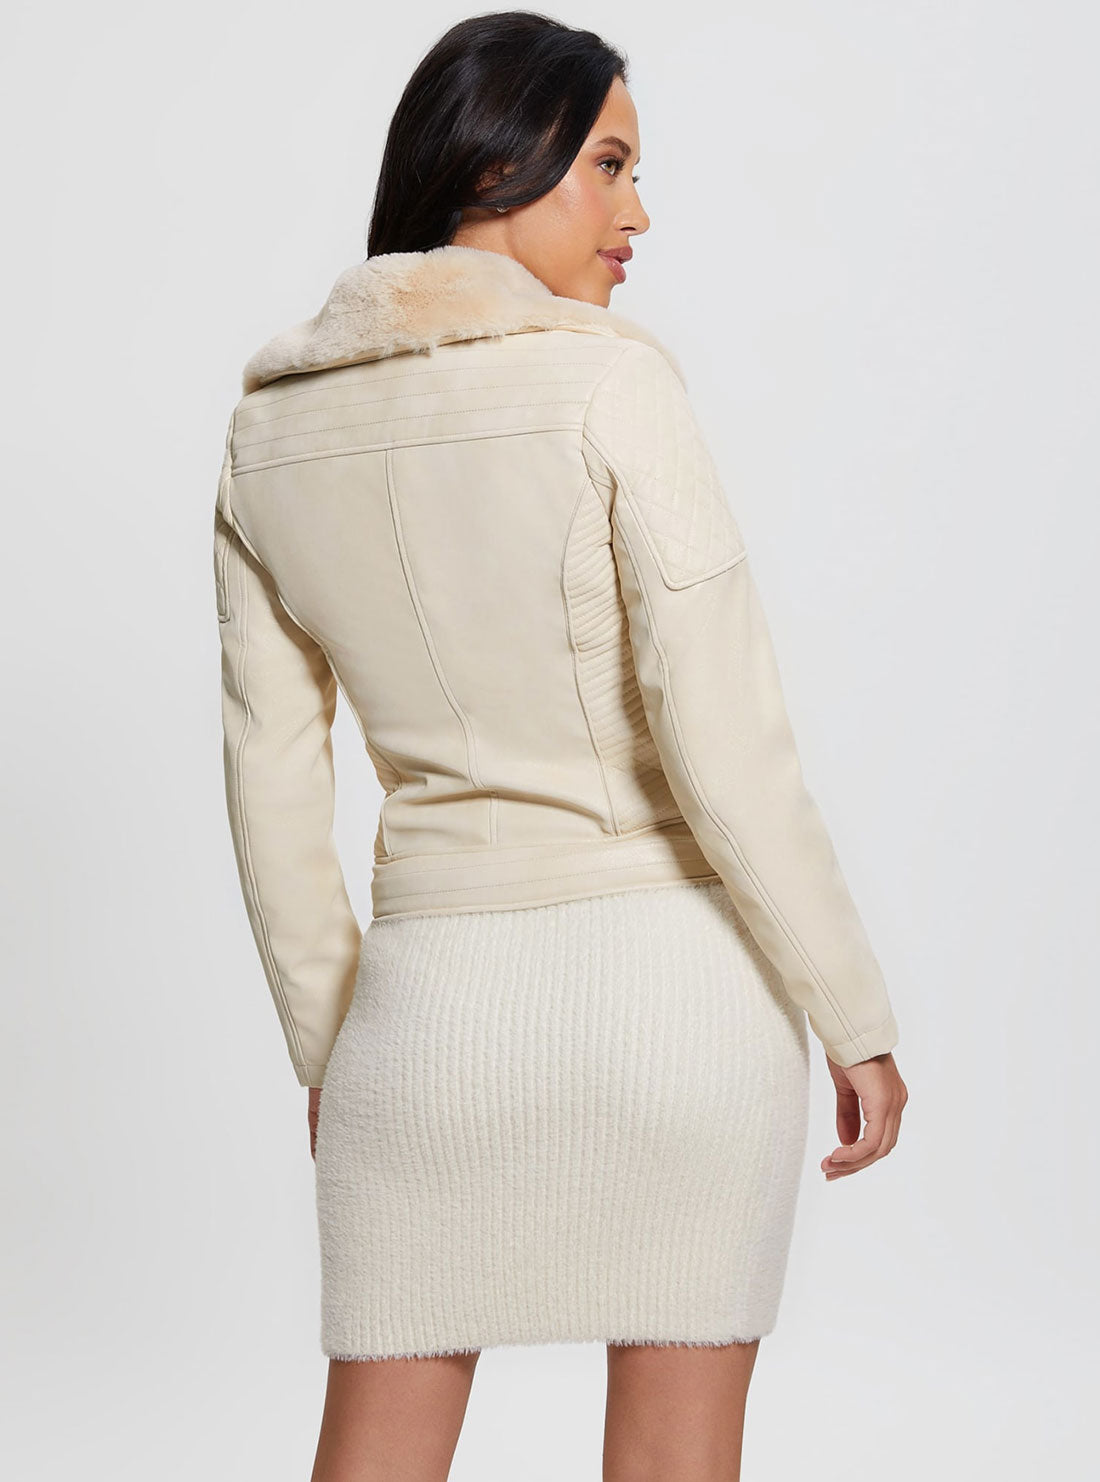 Pearl White Olivia Faux-Leather Jacket | GUESS Women's Apparel | back view